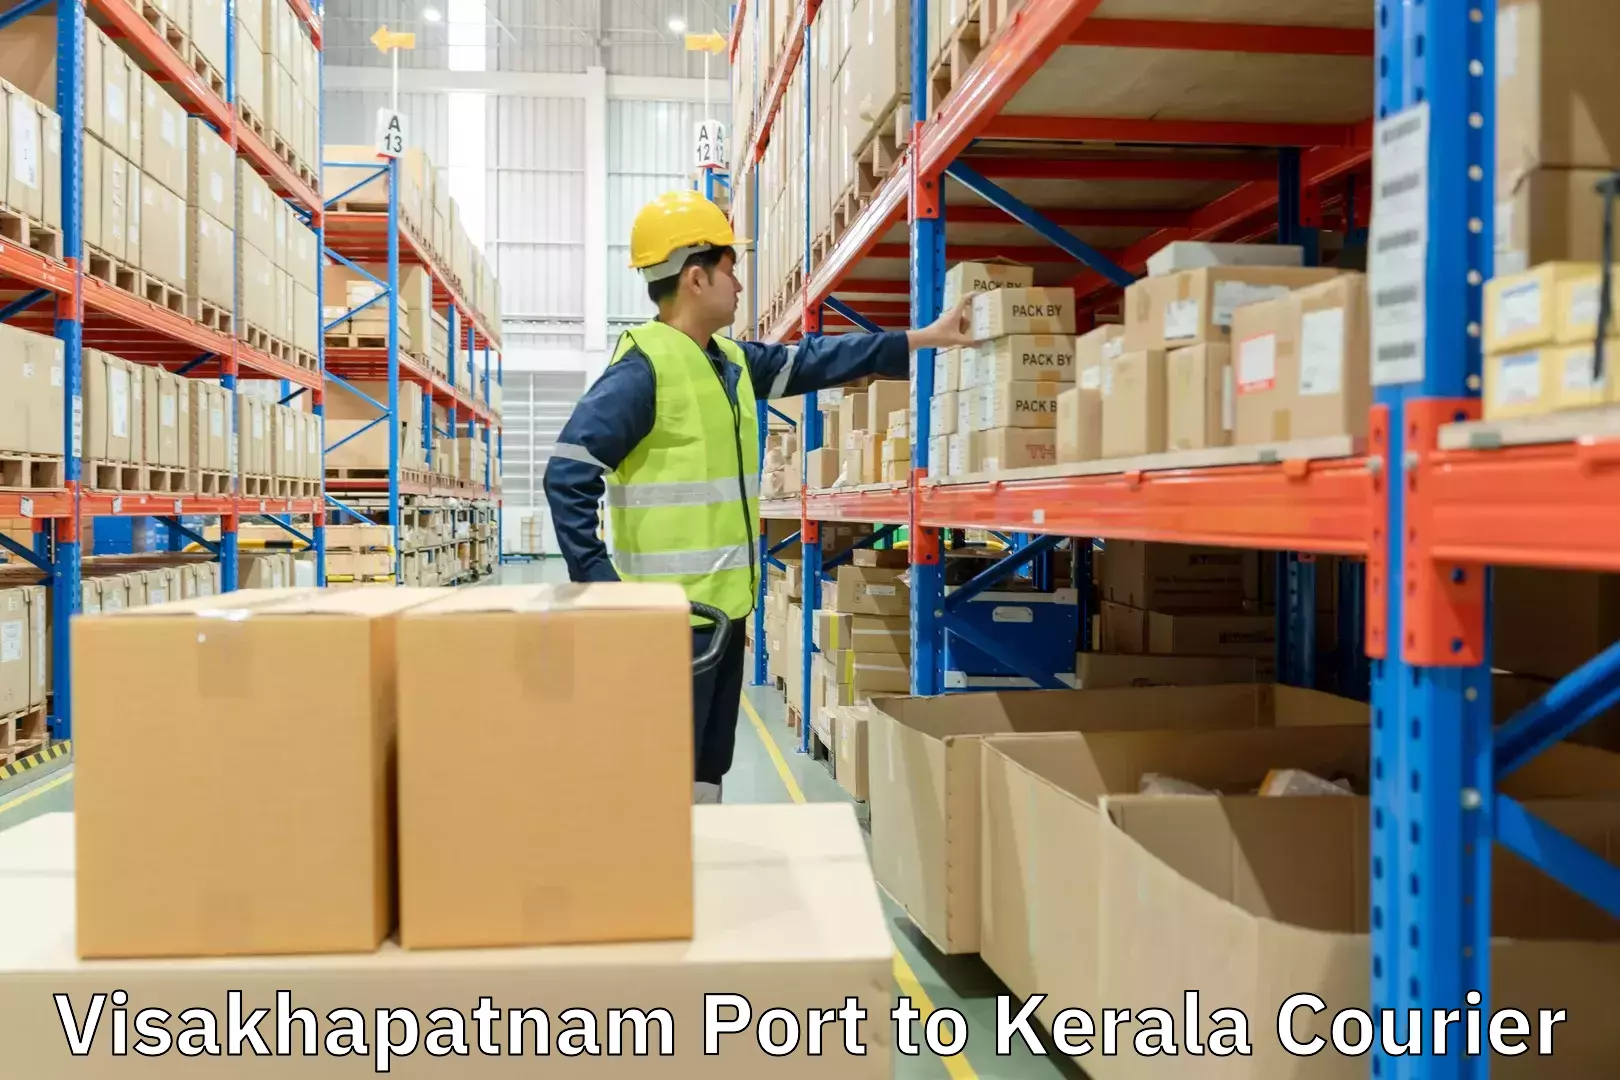 End-to-end delivery in Visakhapatnam Port to Kerala